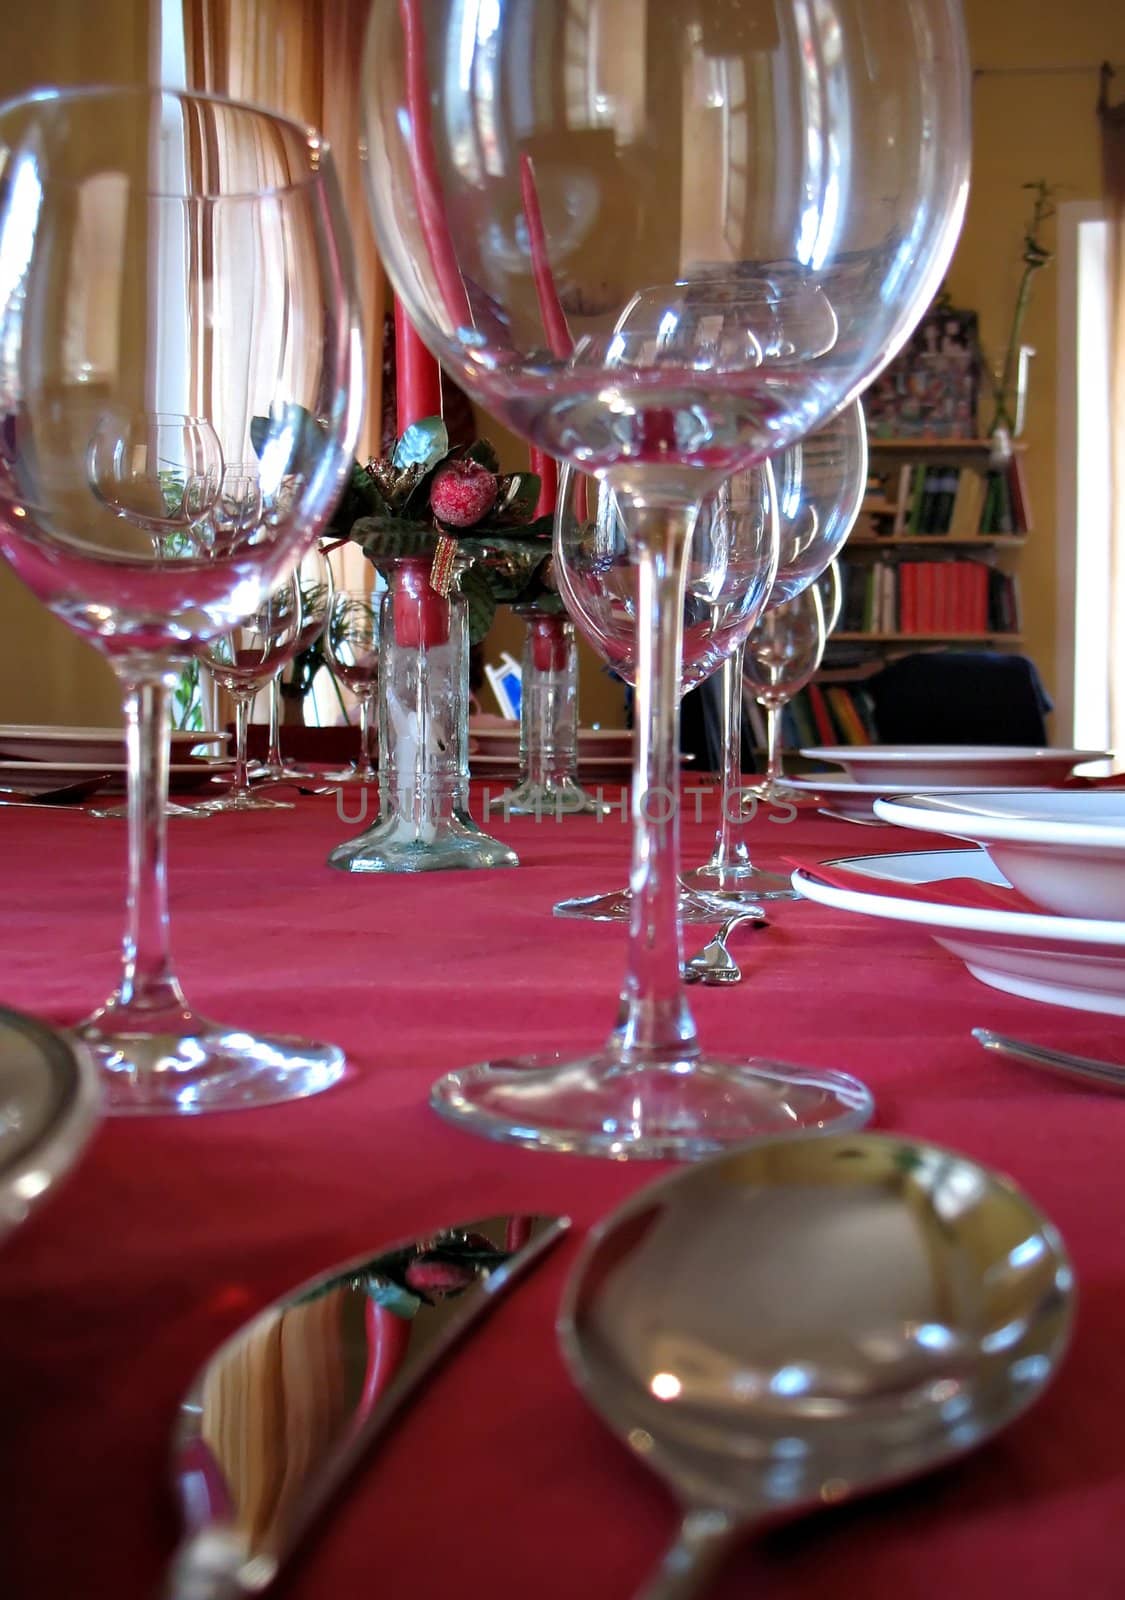 dinner setting for a party: cups of wine, cutlery, candles